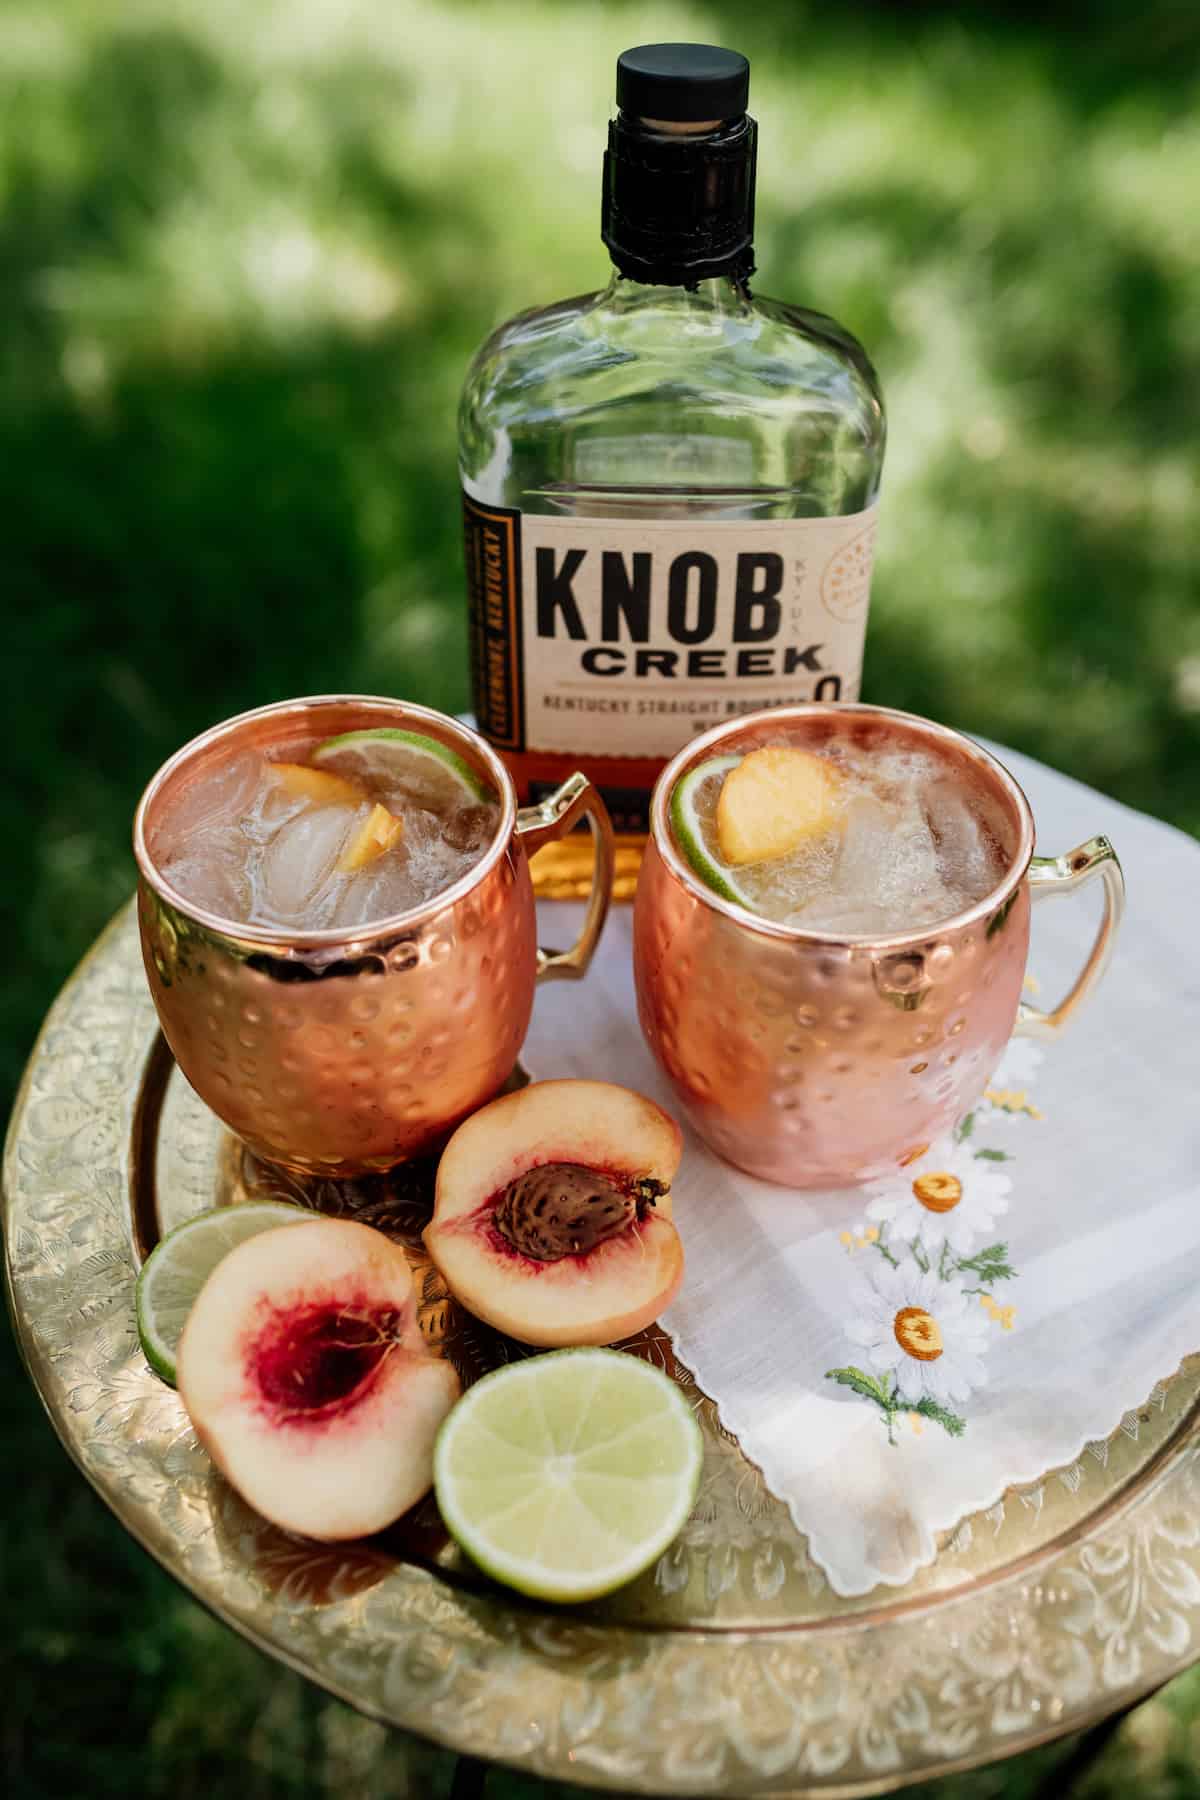 bottle of knob creek next to two peach kentucky mule cocktails